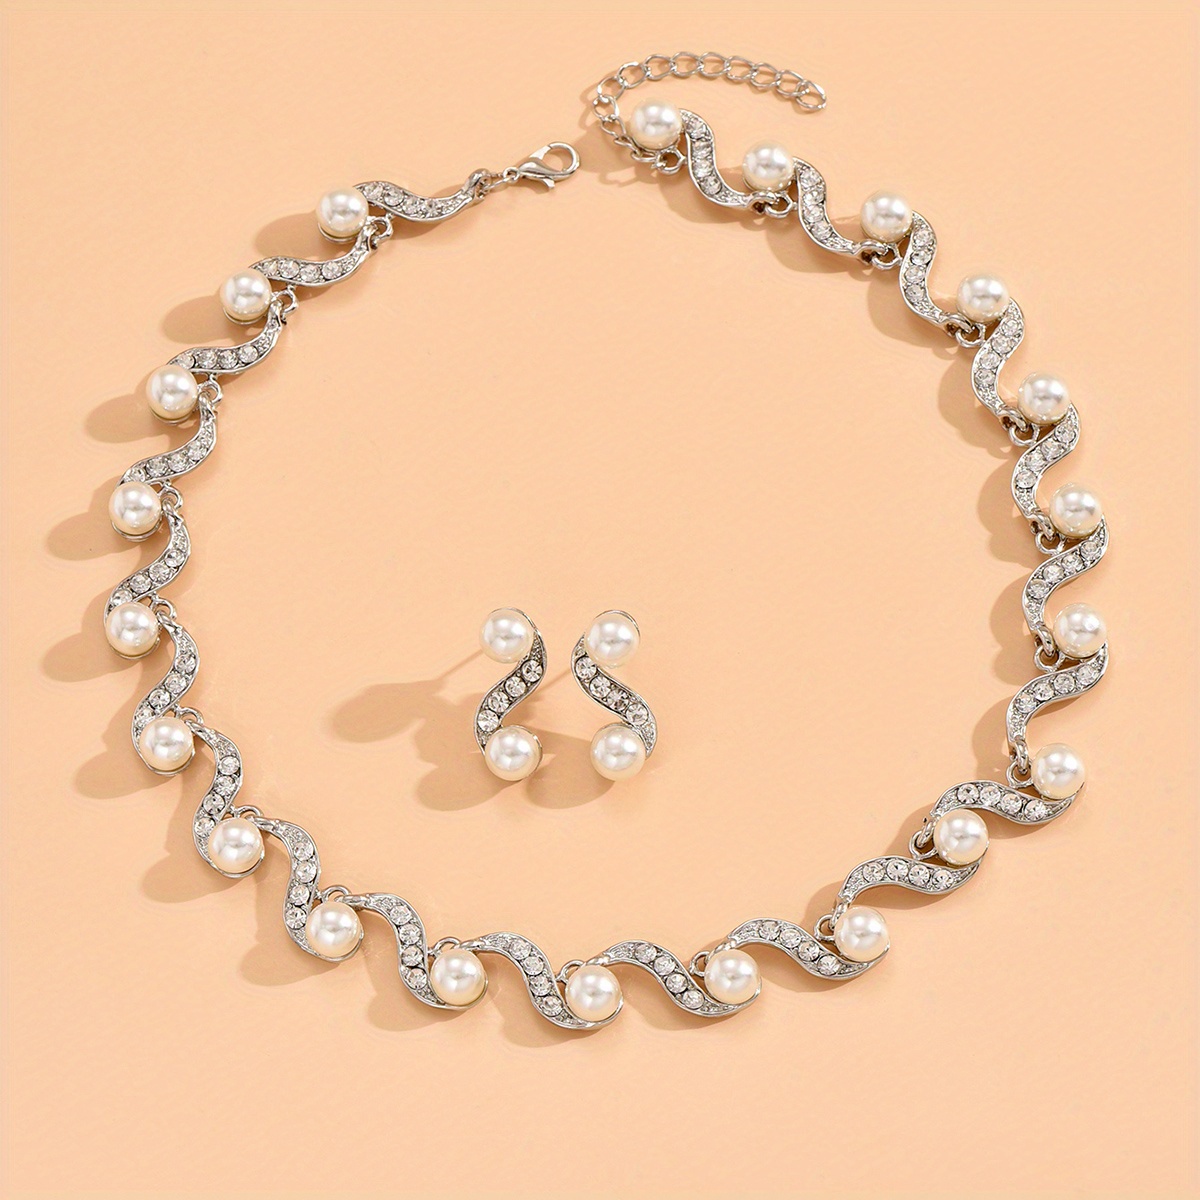 Heart Shape Faux Pearls Jewelry Set With Pendant Necklace & Drop Earrings  Inlaid Shiny Rhinestones Elegant Jewelry Set